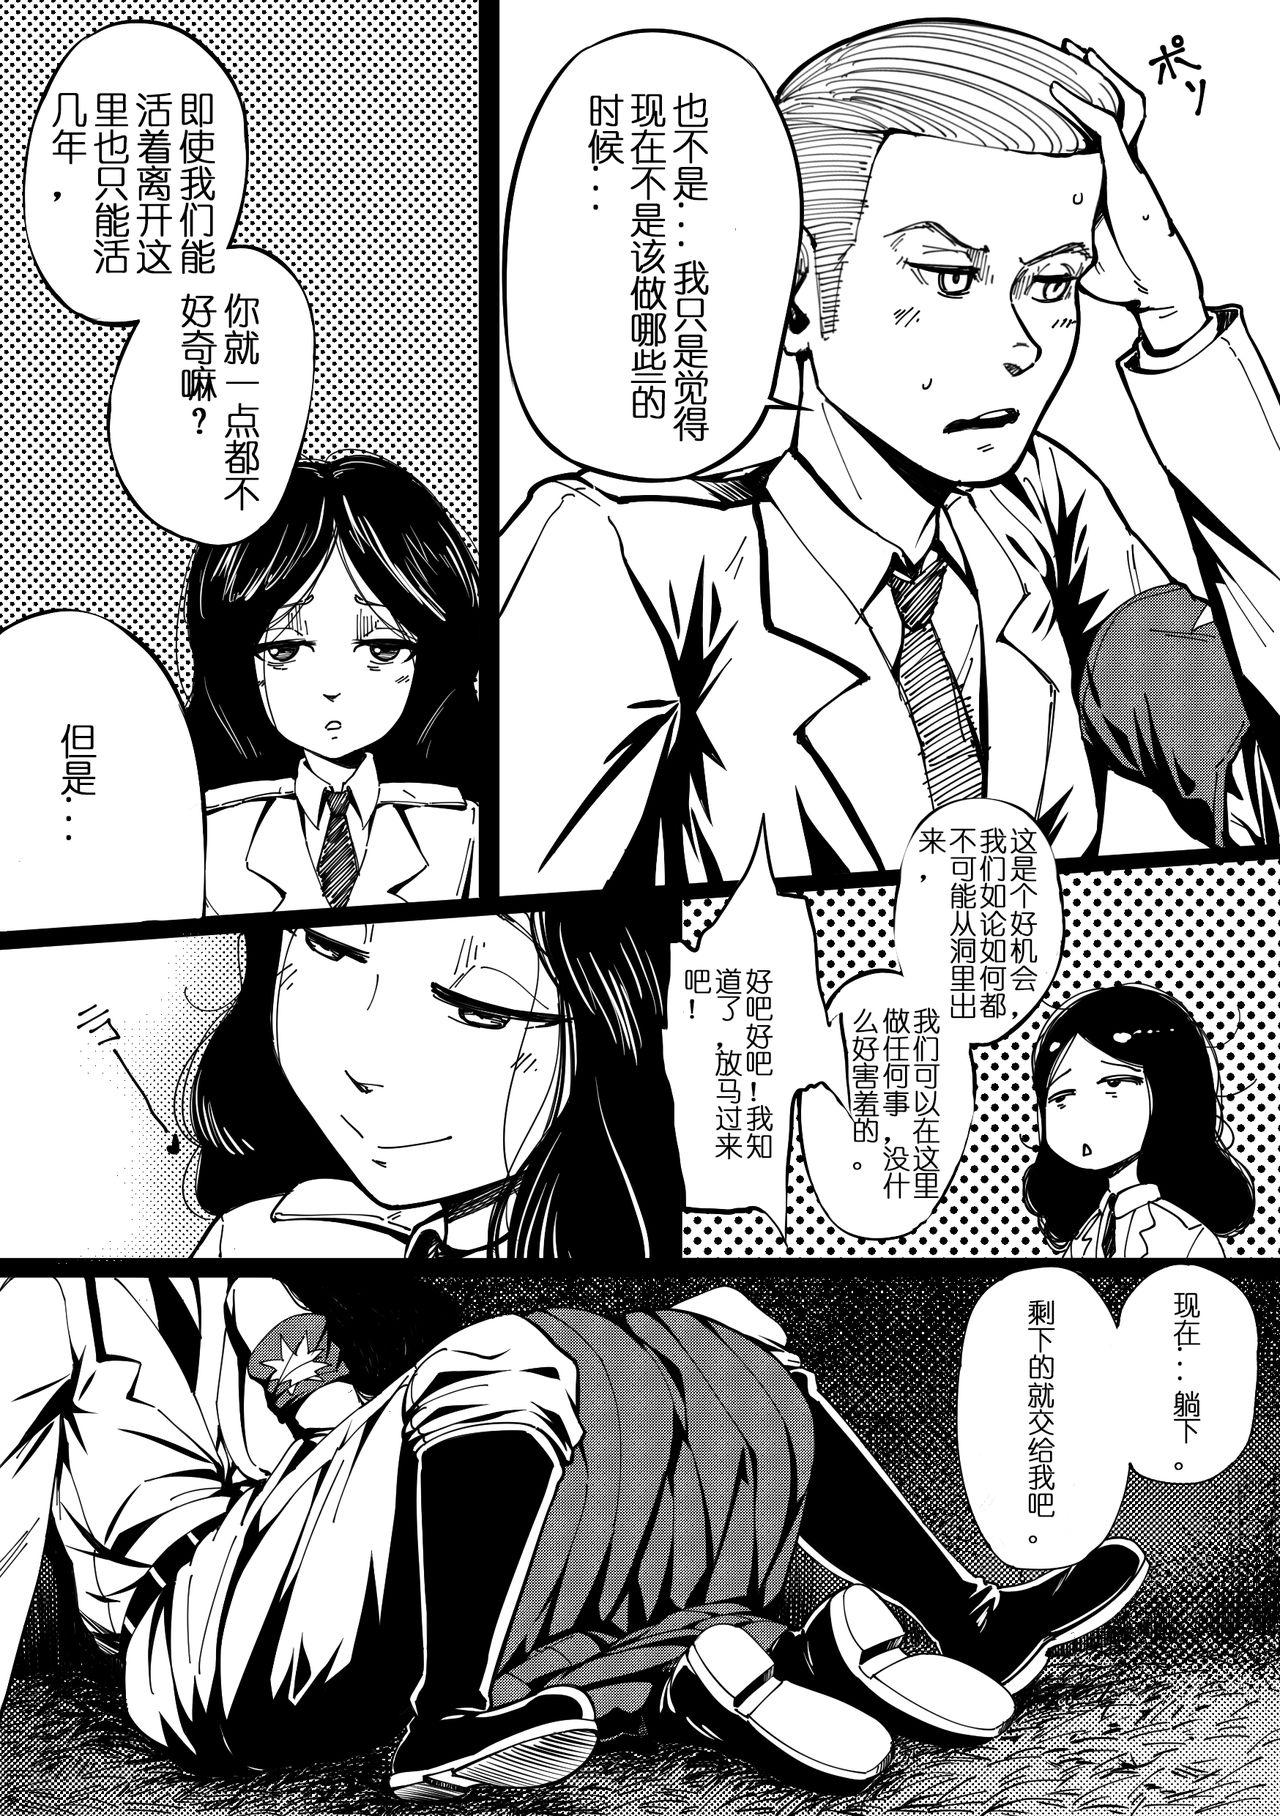 Pastime with Pieck-chan 4